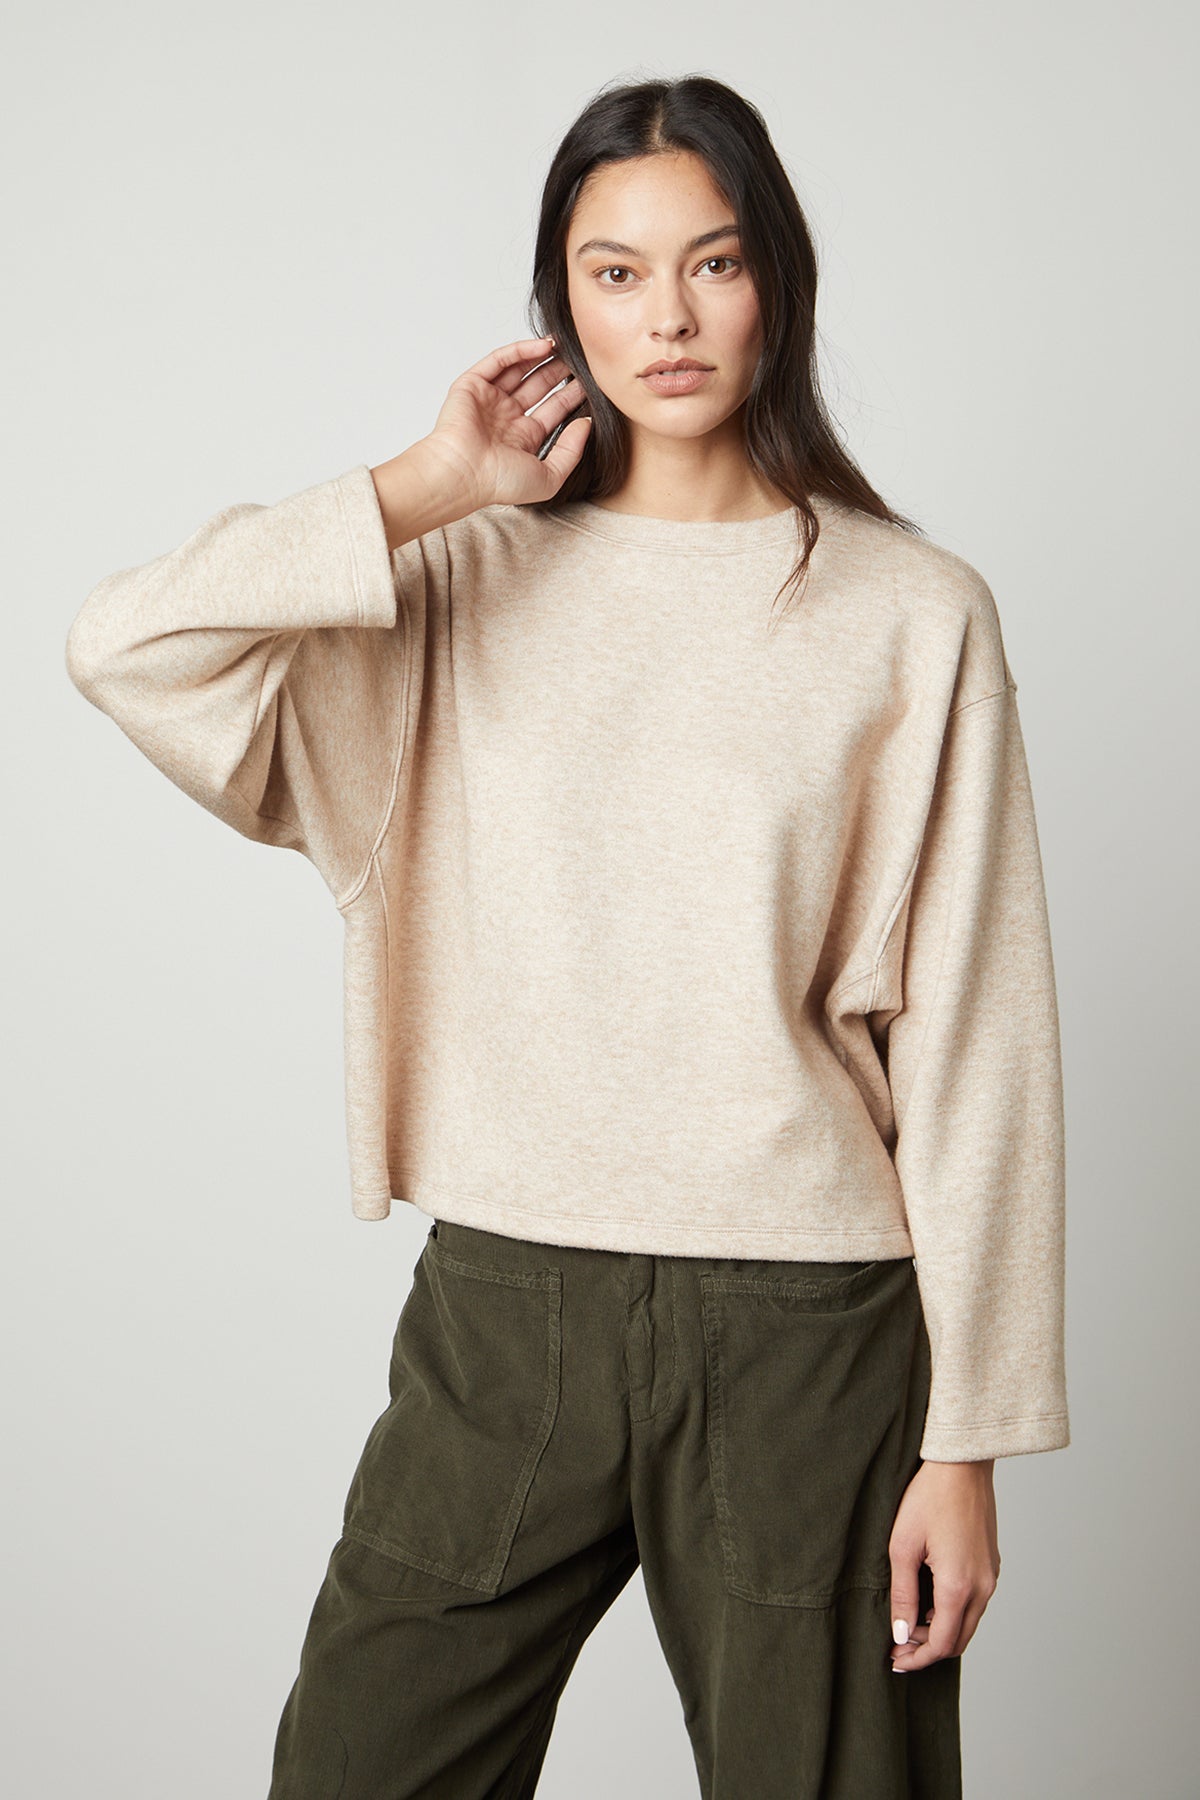   The model is wearing the NIA DOUBLE KNIT CROPPED CREW by Velvet by Graham & Spencer for a comfortable style. 